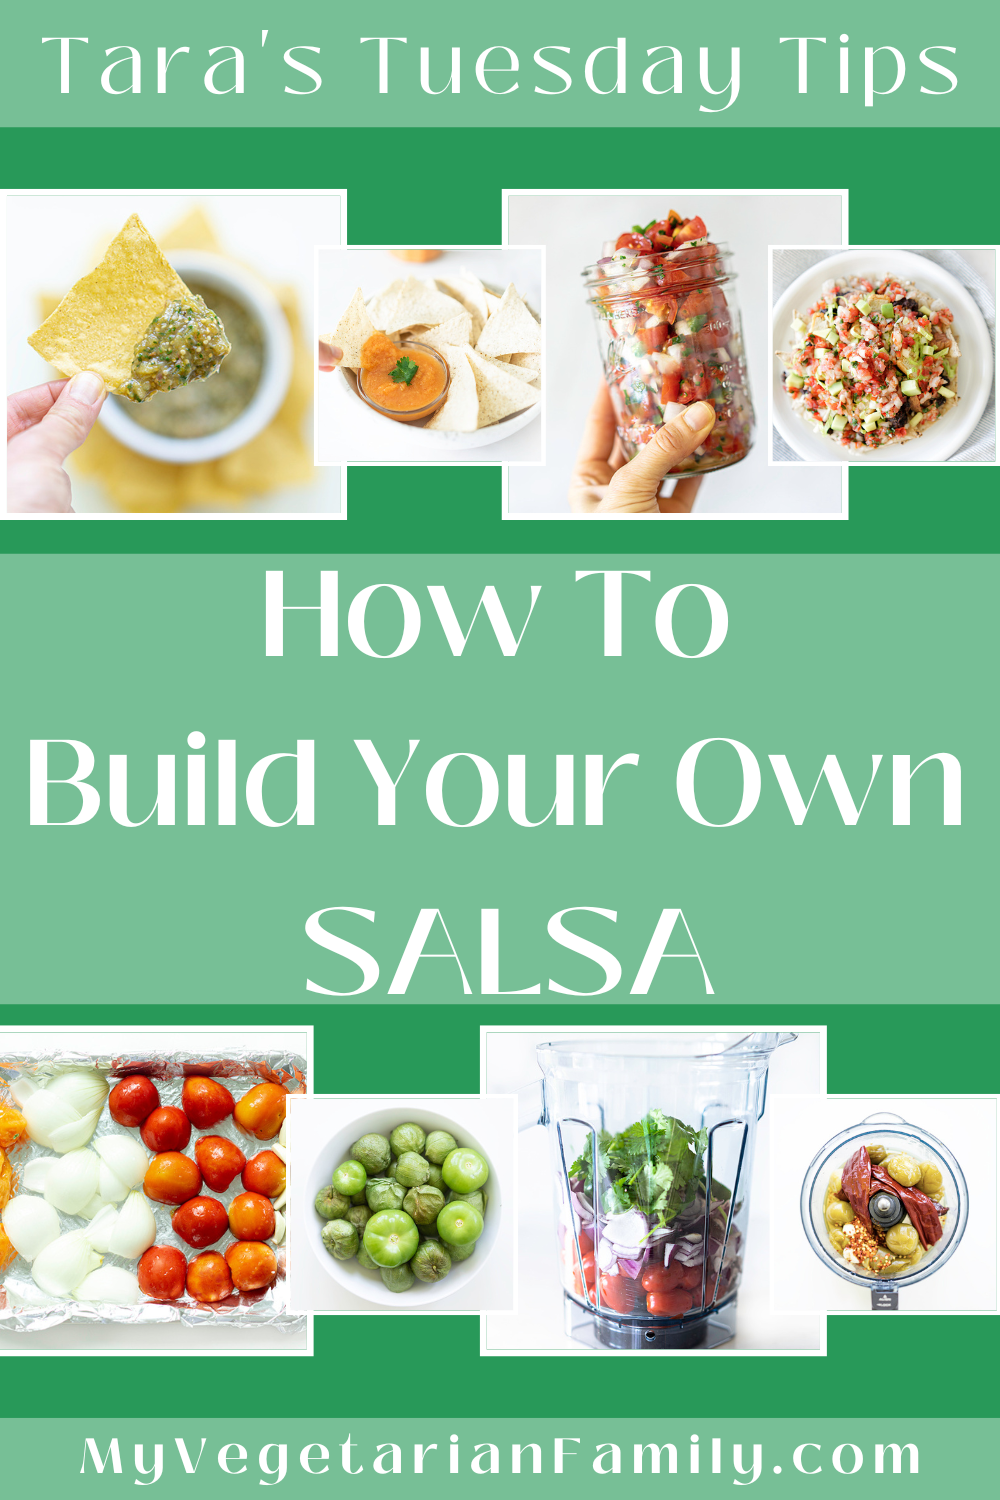 How to Can Homemade Salsa - Wyse Guide